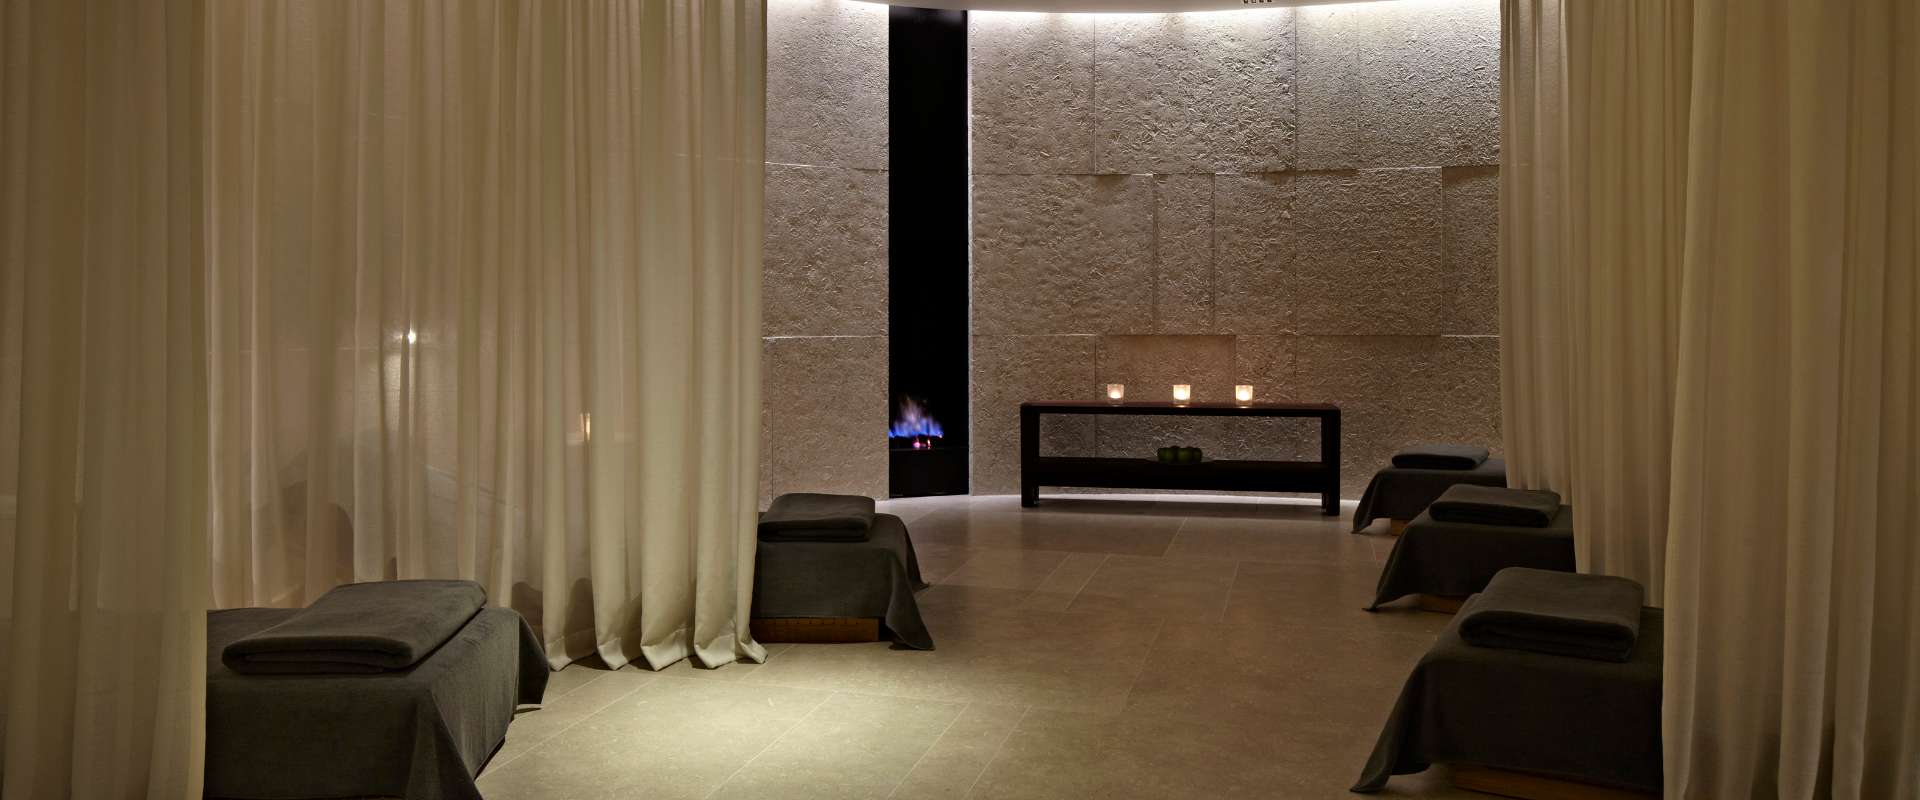 Bulgari Hotel London Spa And Fitness Relaxation Room